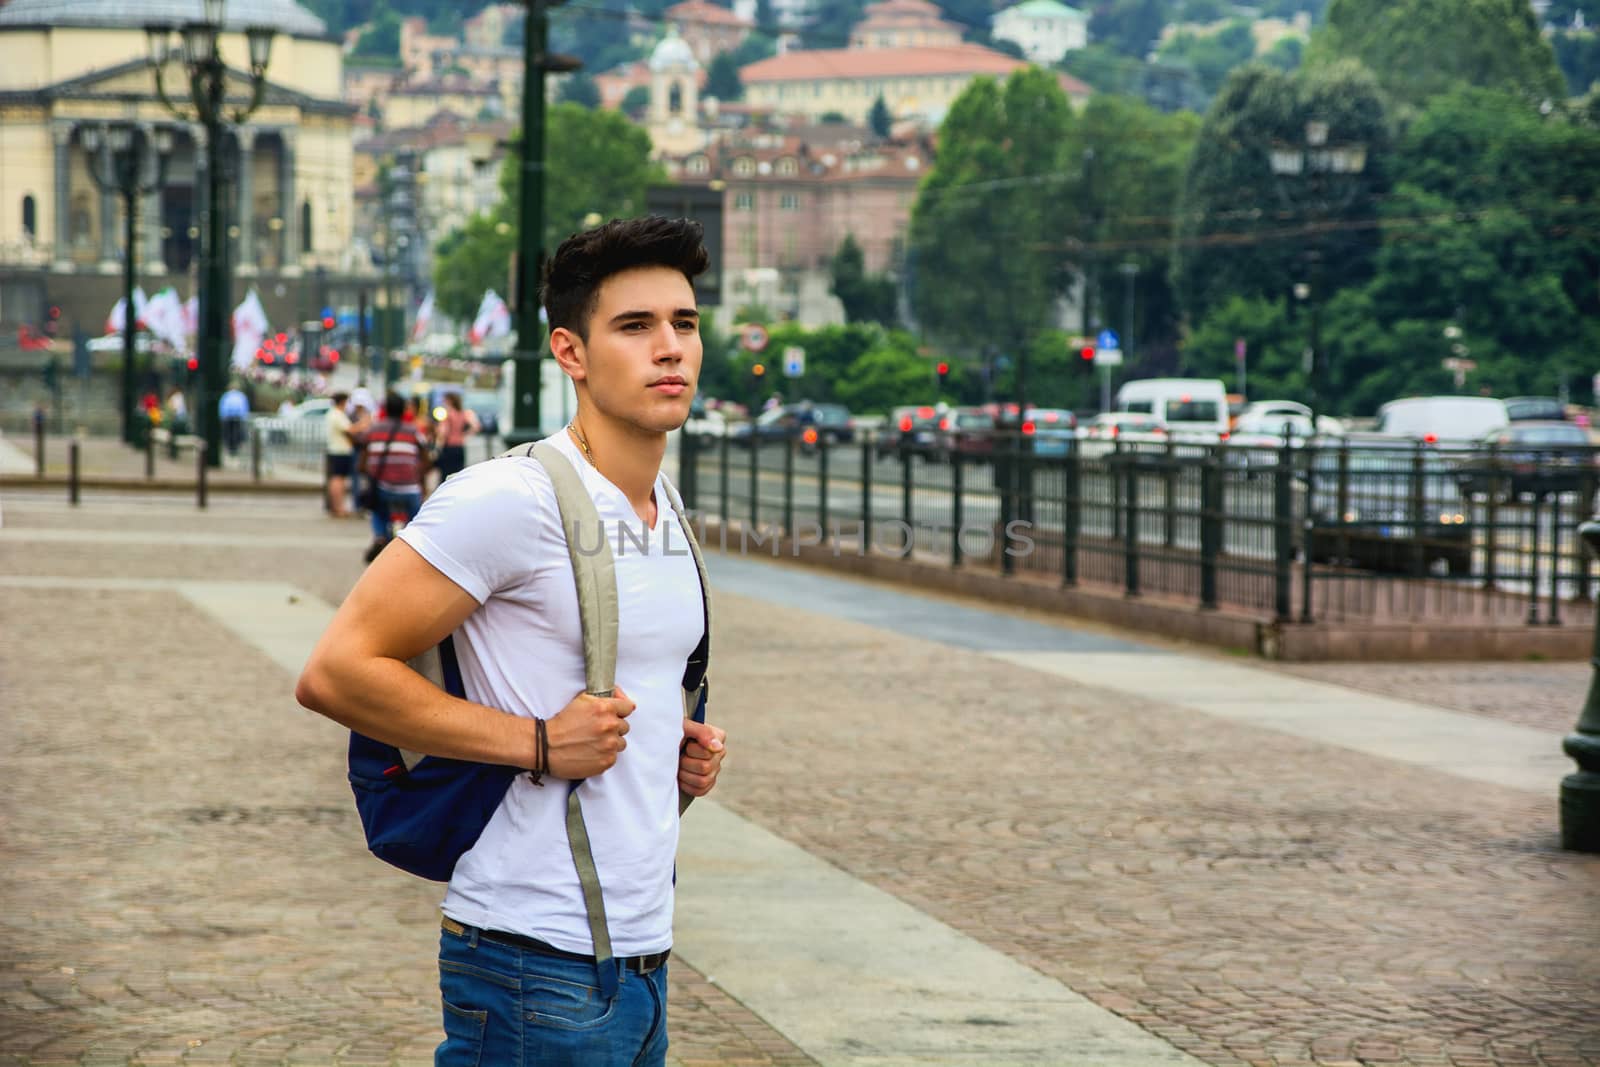 Handsome young man walking in European city square, Piazza Vittorio Veneto in Turin, Italy